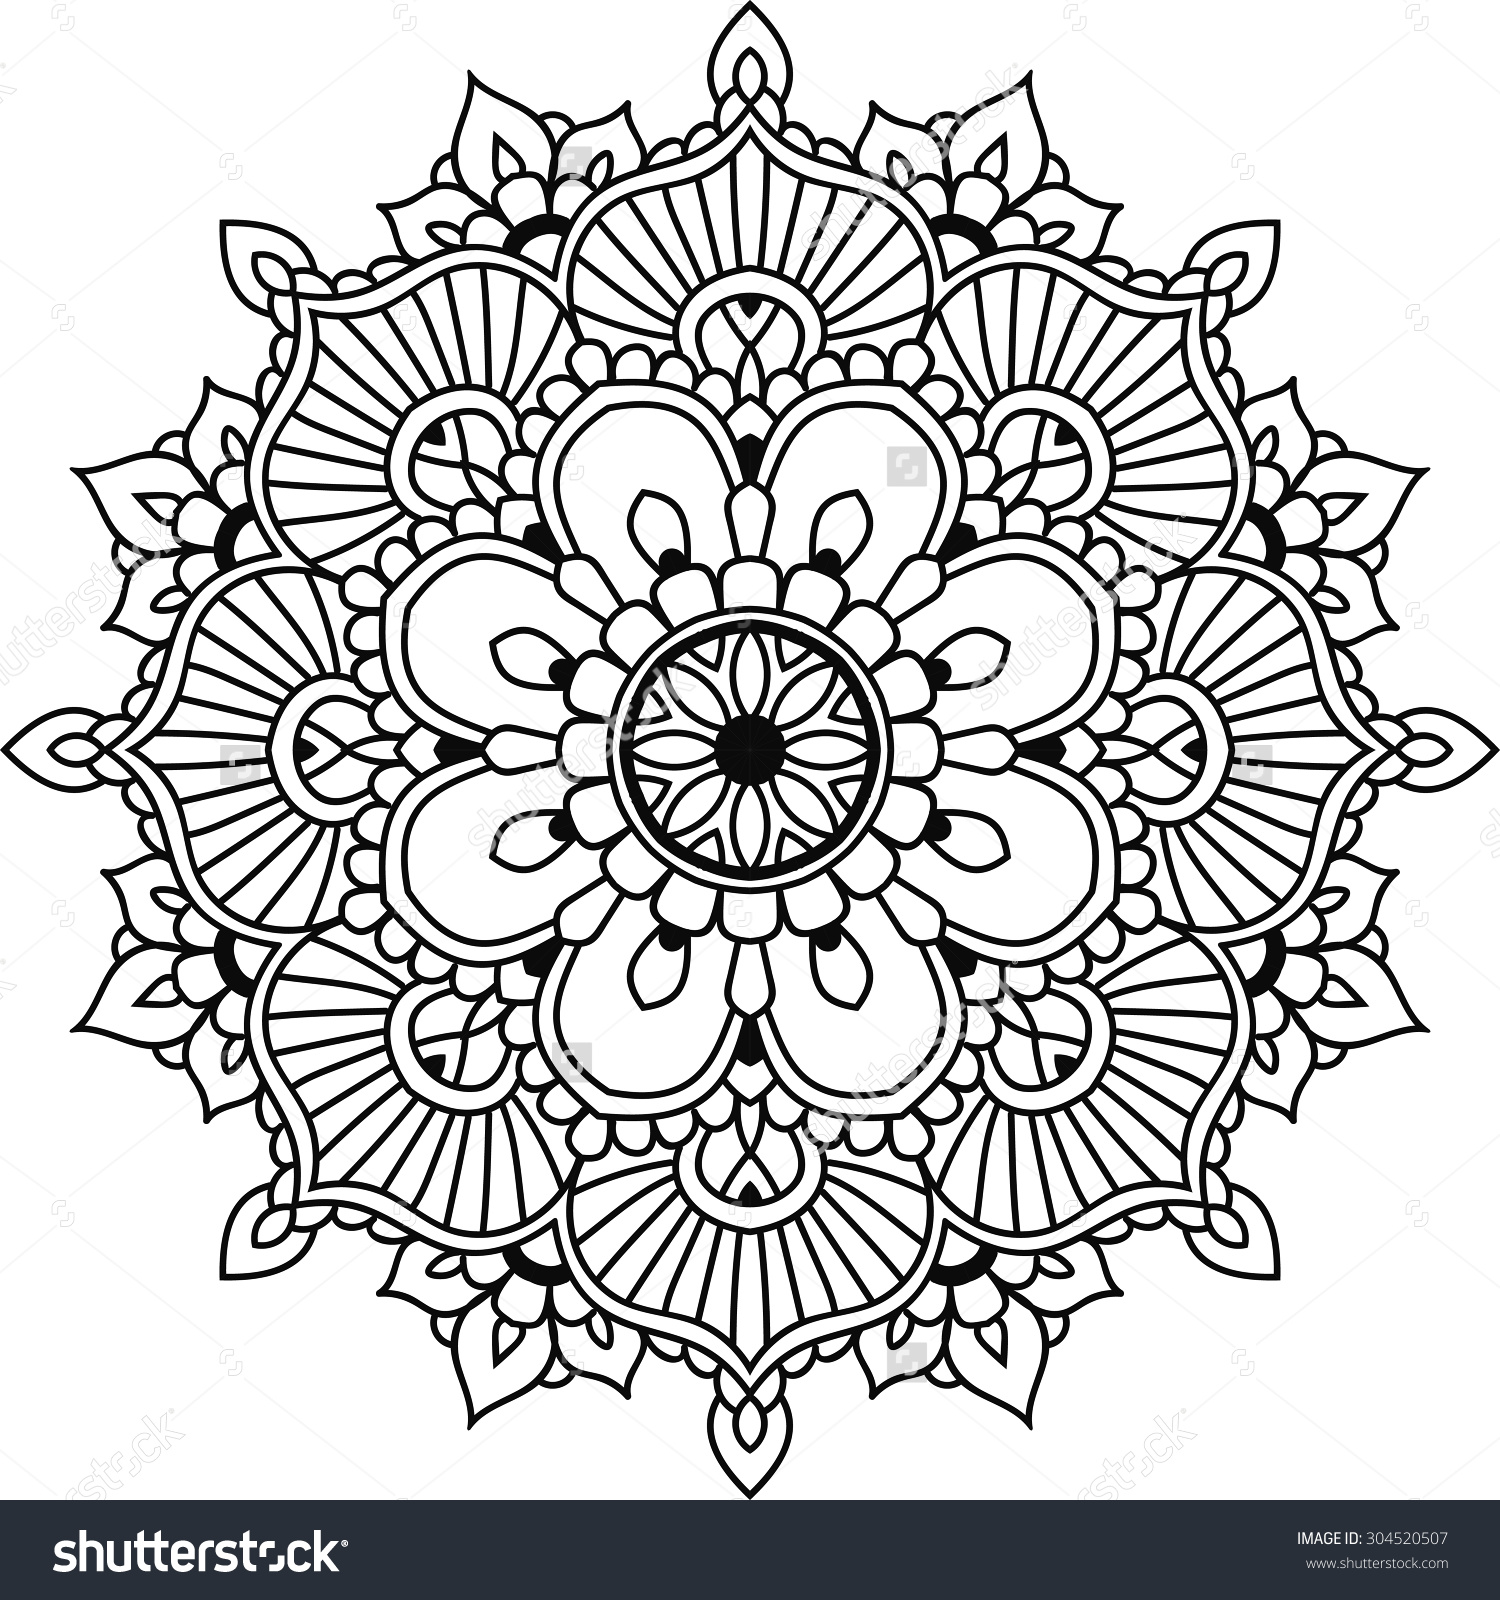 Floral mandala clipart 20 free Cliparts | Download images ...